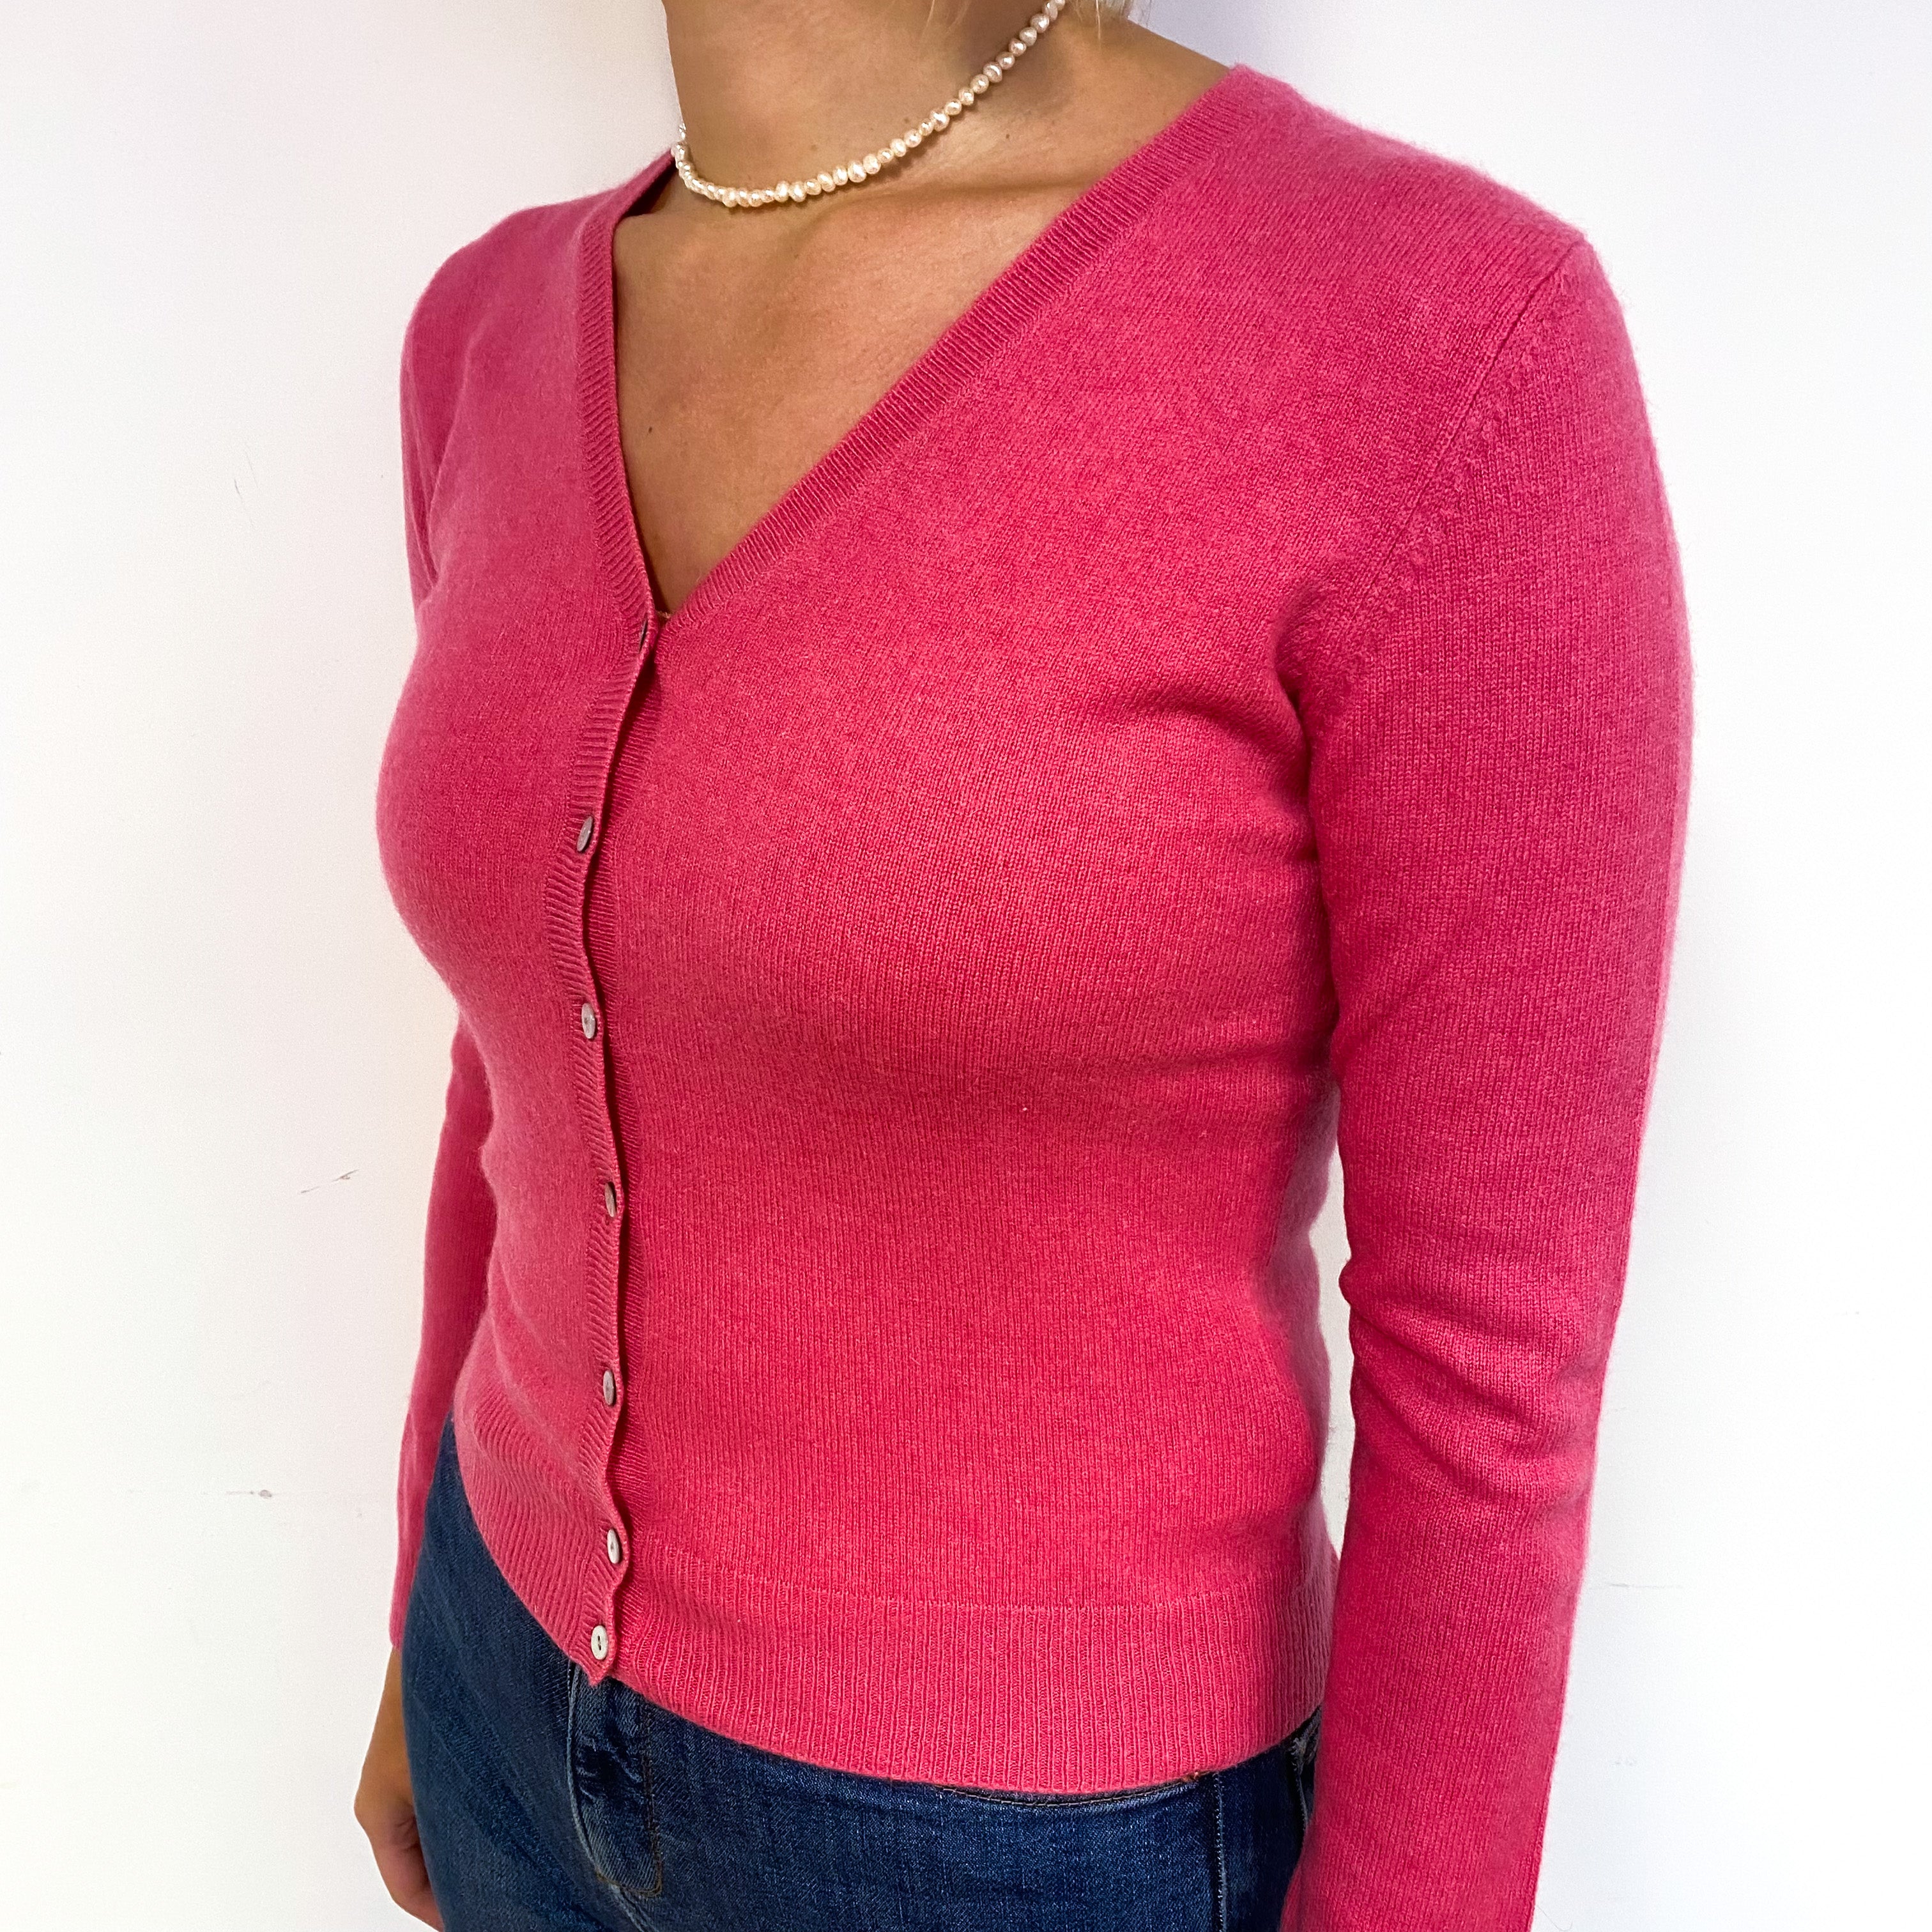 Lupin Pink Cashmere V-Neck Cardigan Small